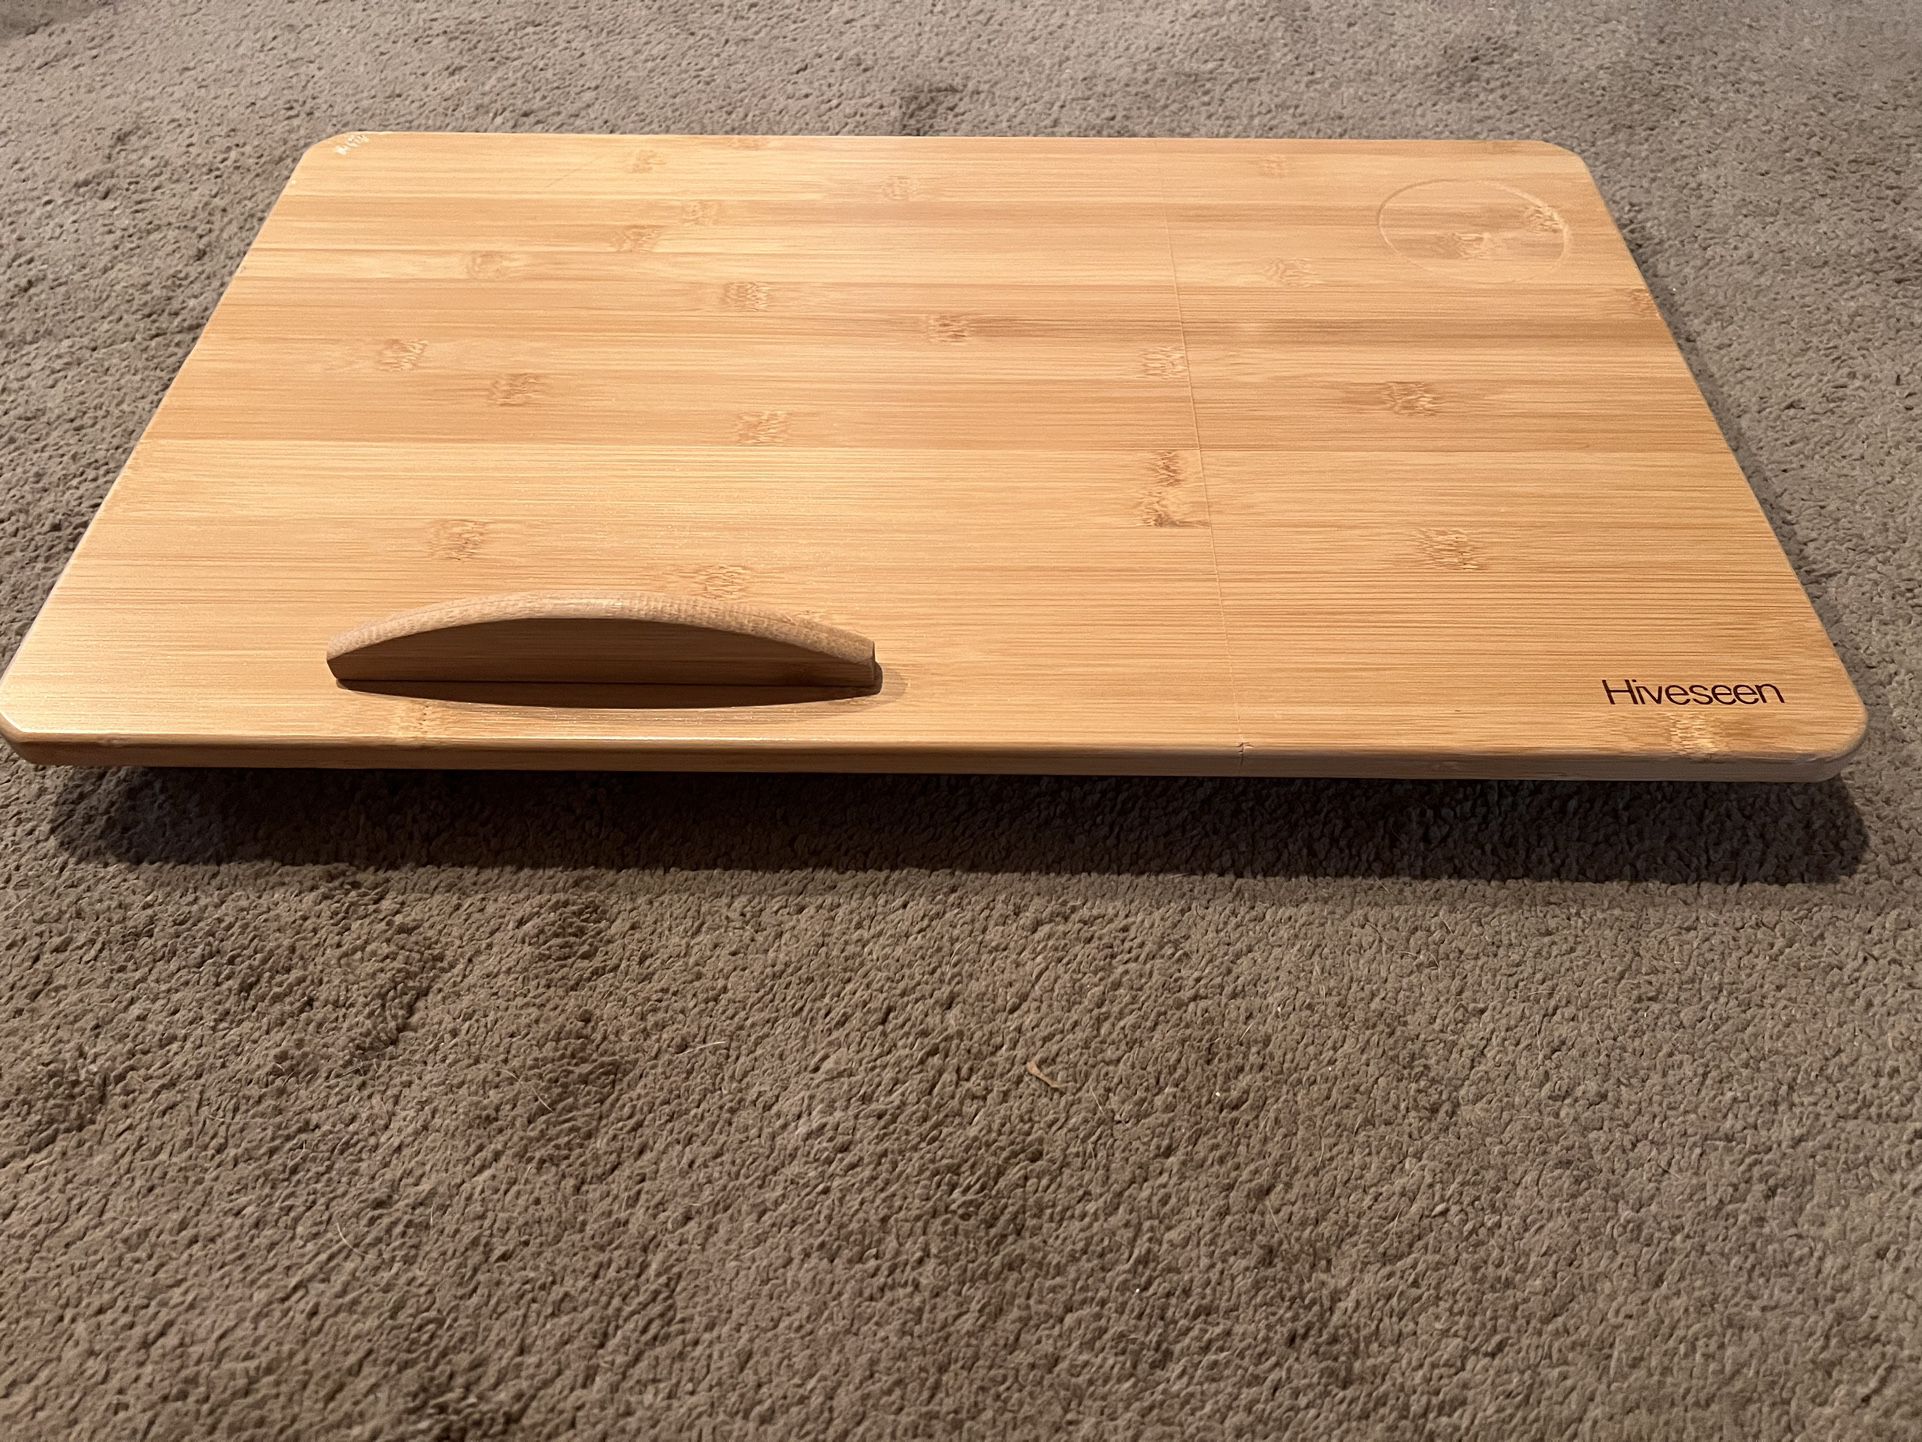 Bamboo Laptop Desk For Bed 